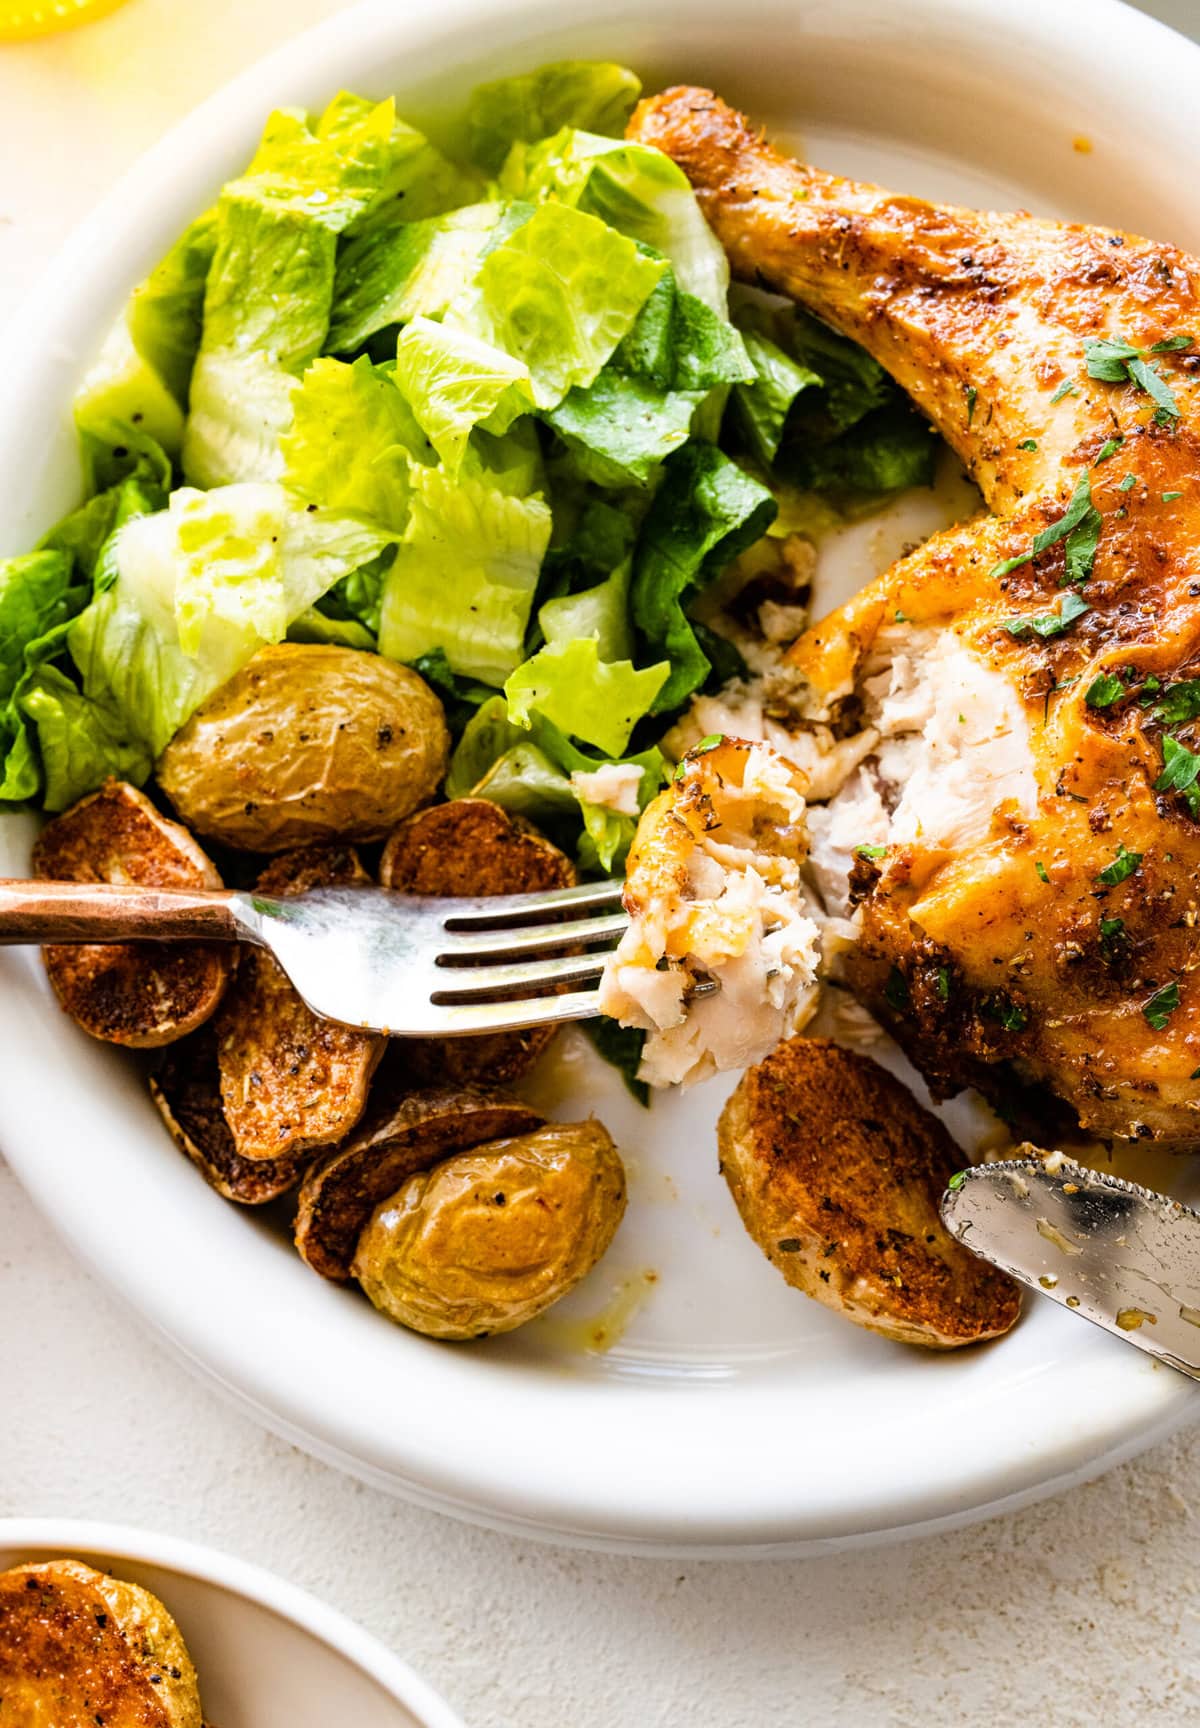 platted baked chicken with potatoes and salad. Bite of chicken on a fork.